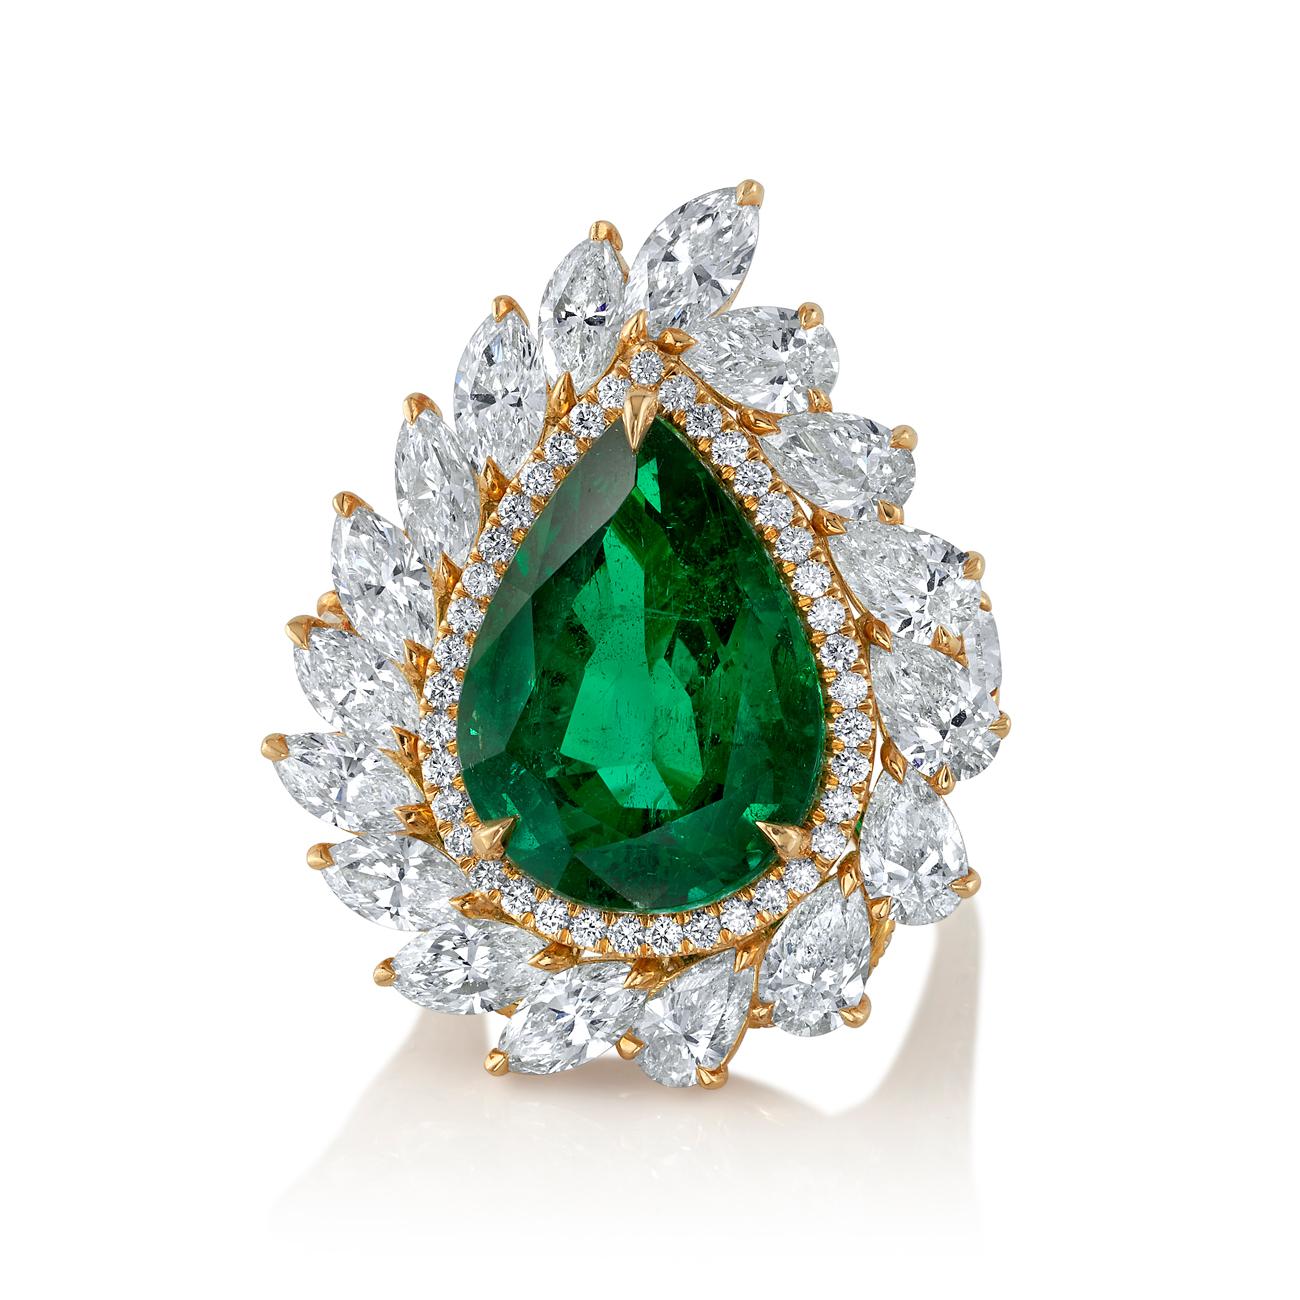 Ring Size: 6
18K yellow gold
11.24CT Natural Beryl Zambian Pear Shape Emerald
8.29ctw I-J/VS Pear Shape, Marquis Cut, and Round Brilliant Diamonds
Includes de Boulle box, C. DUNAIGRE Certificate for Emerald
